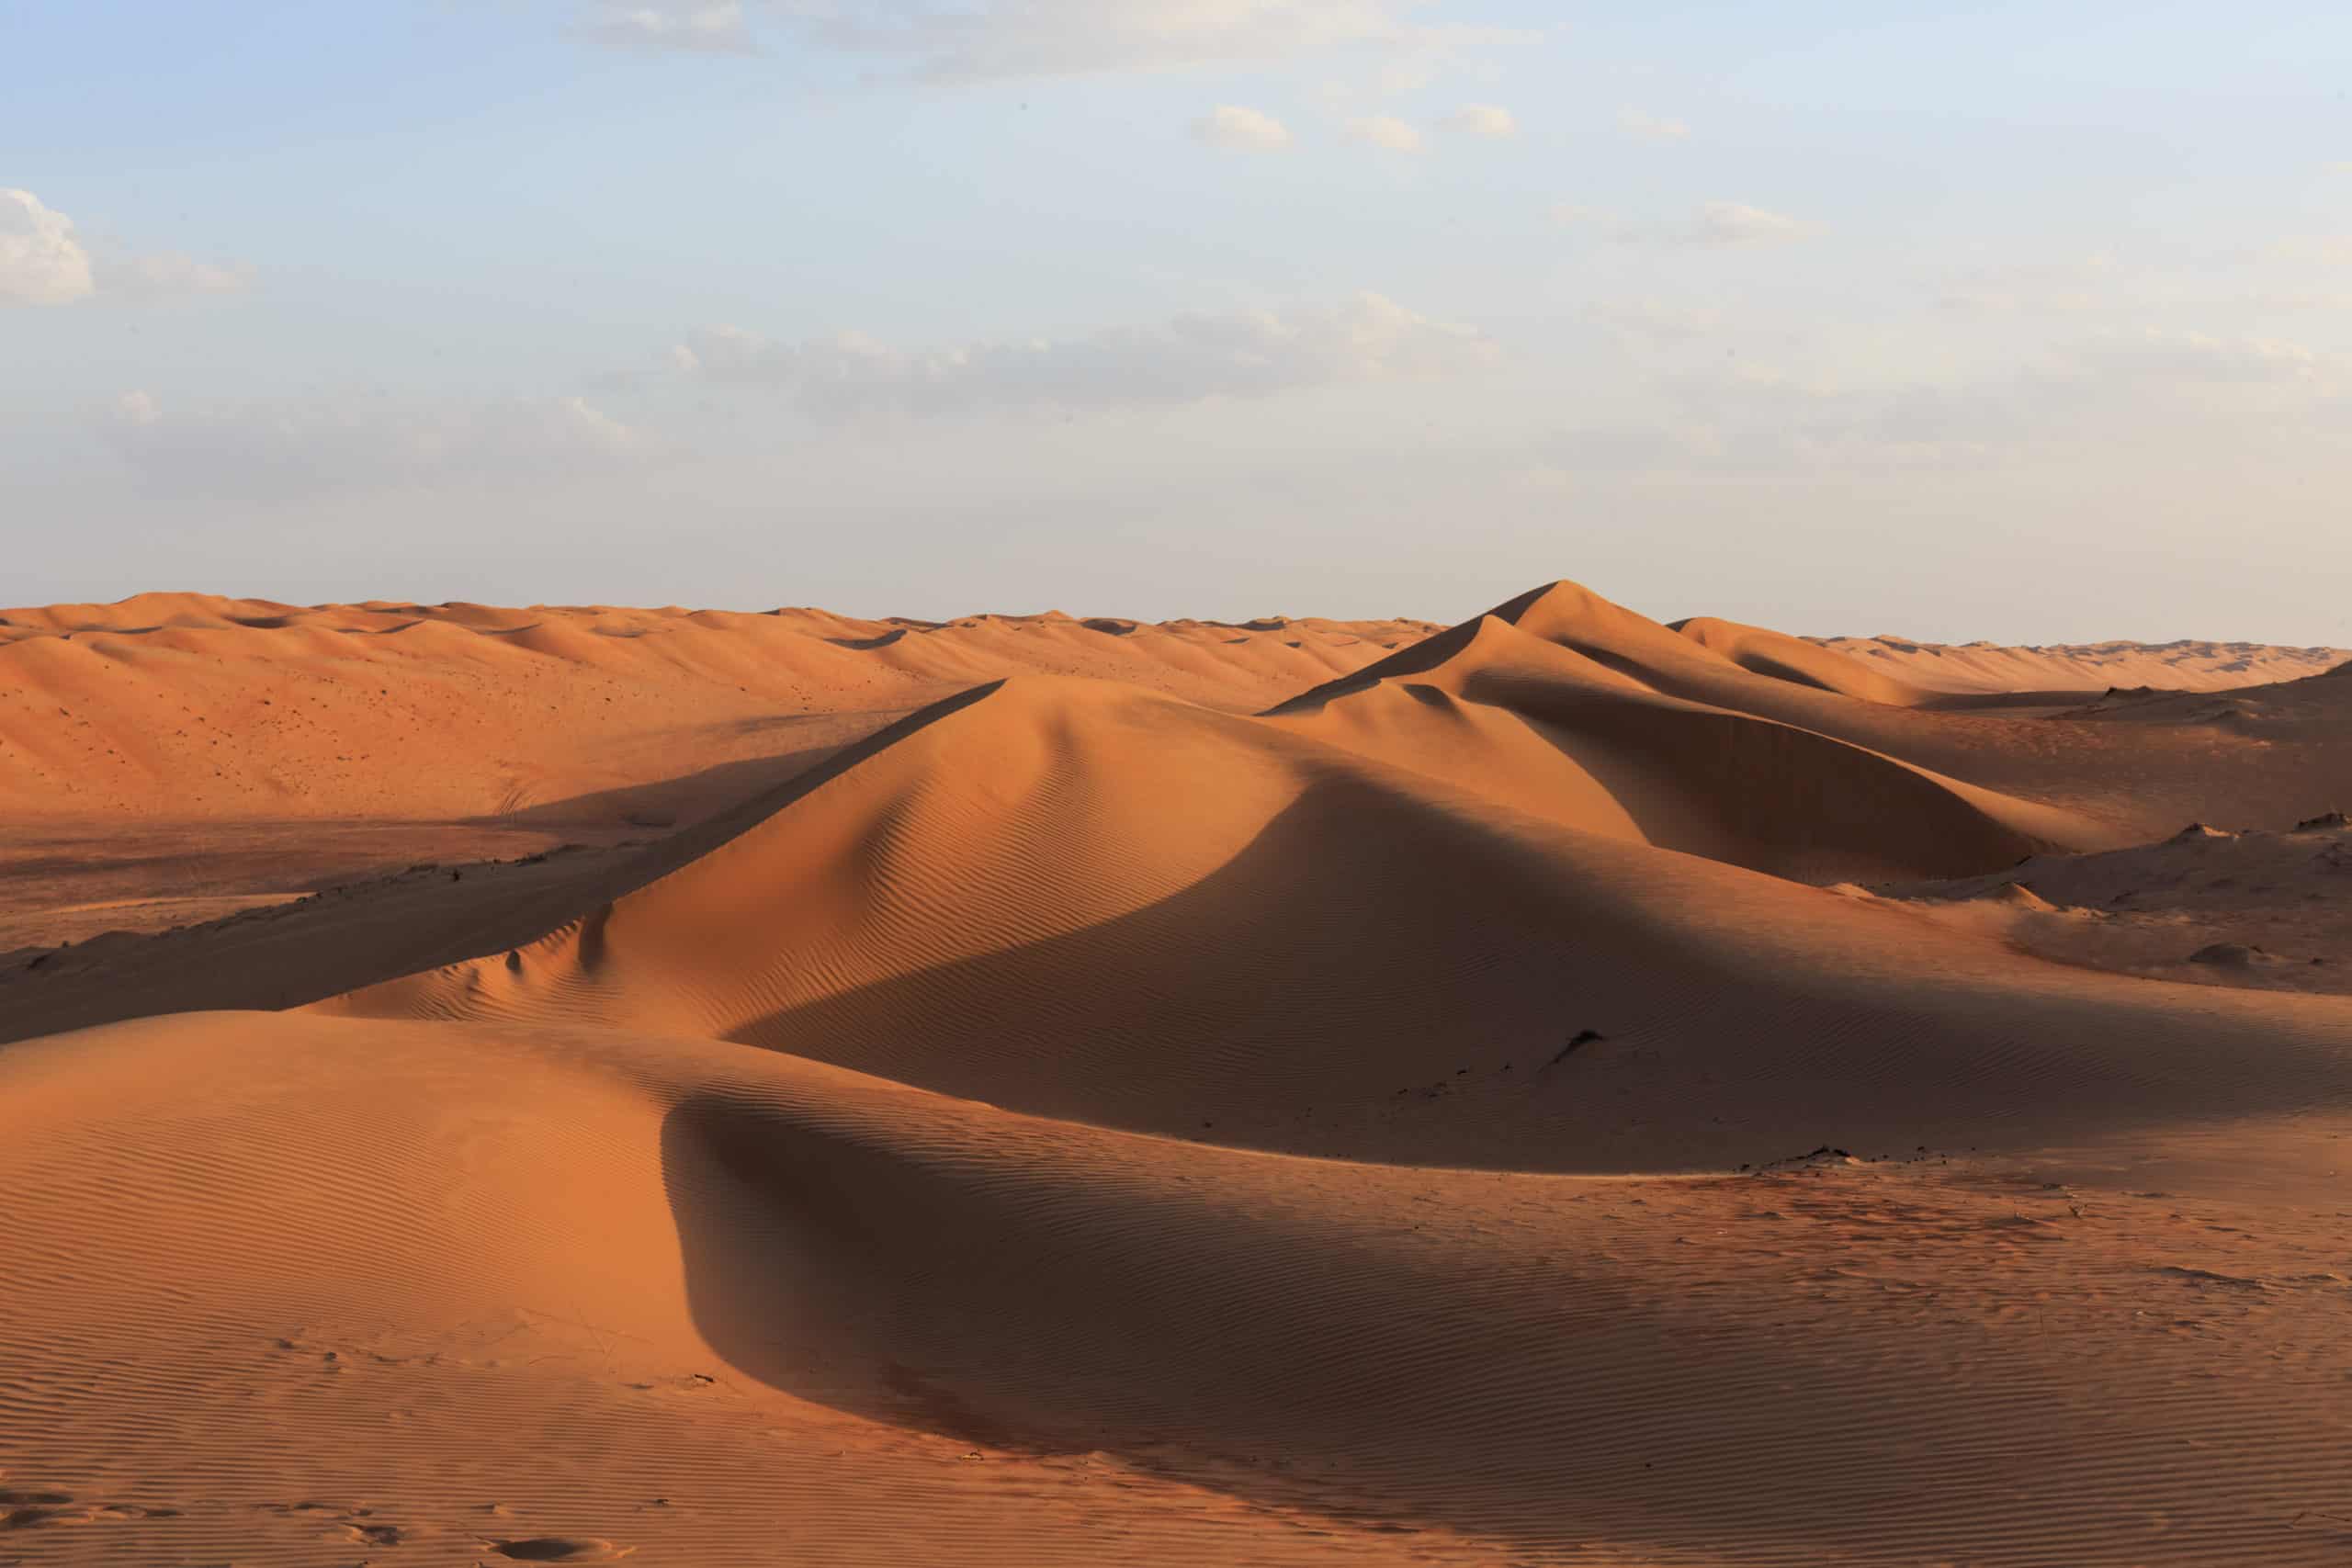 Desert Safari in Sharqiya/ Wahiba Sands: A Must do thing if you are traveling to Oman